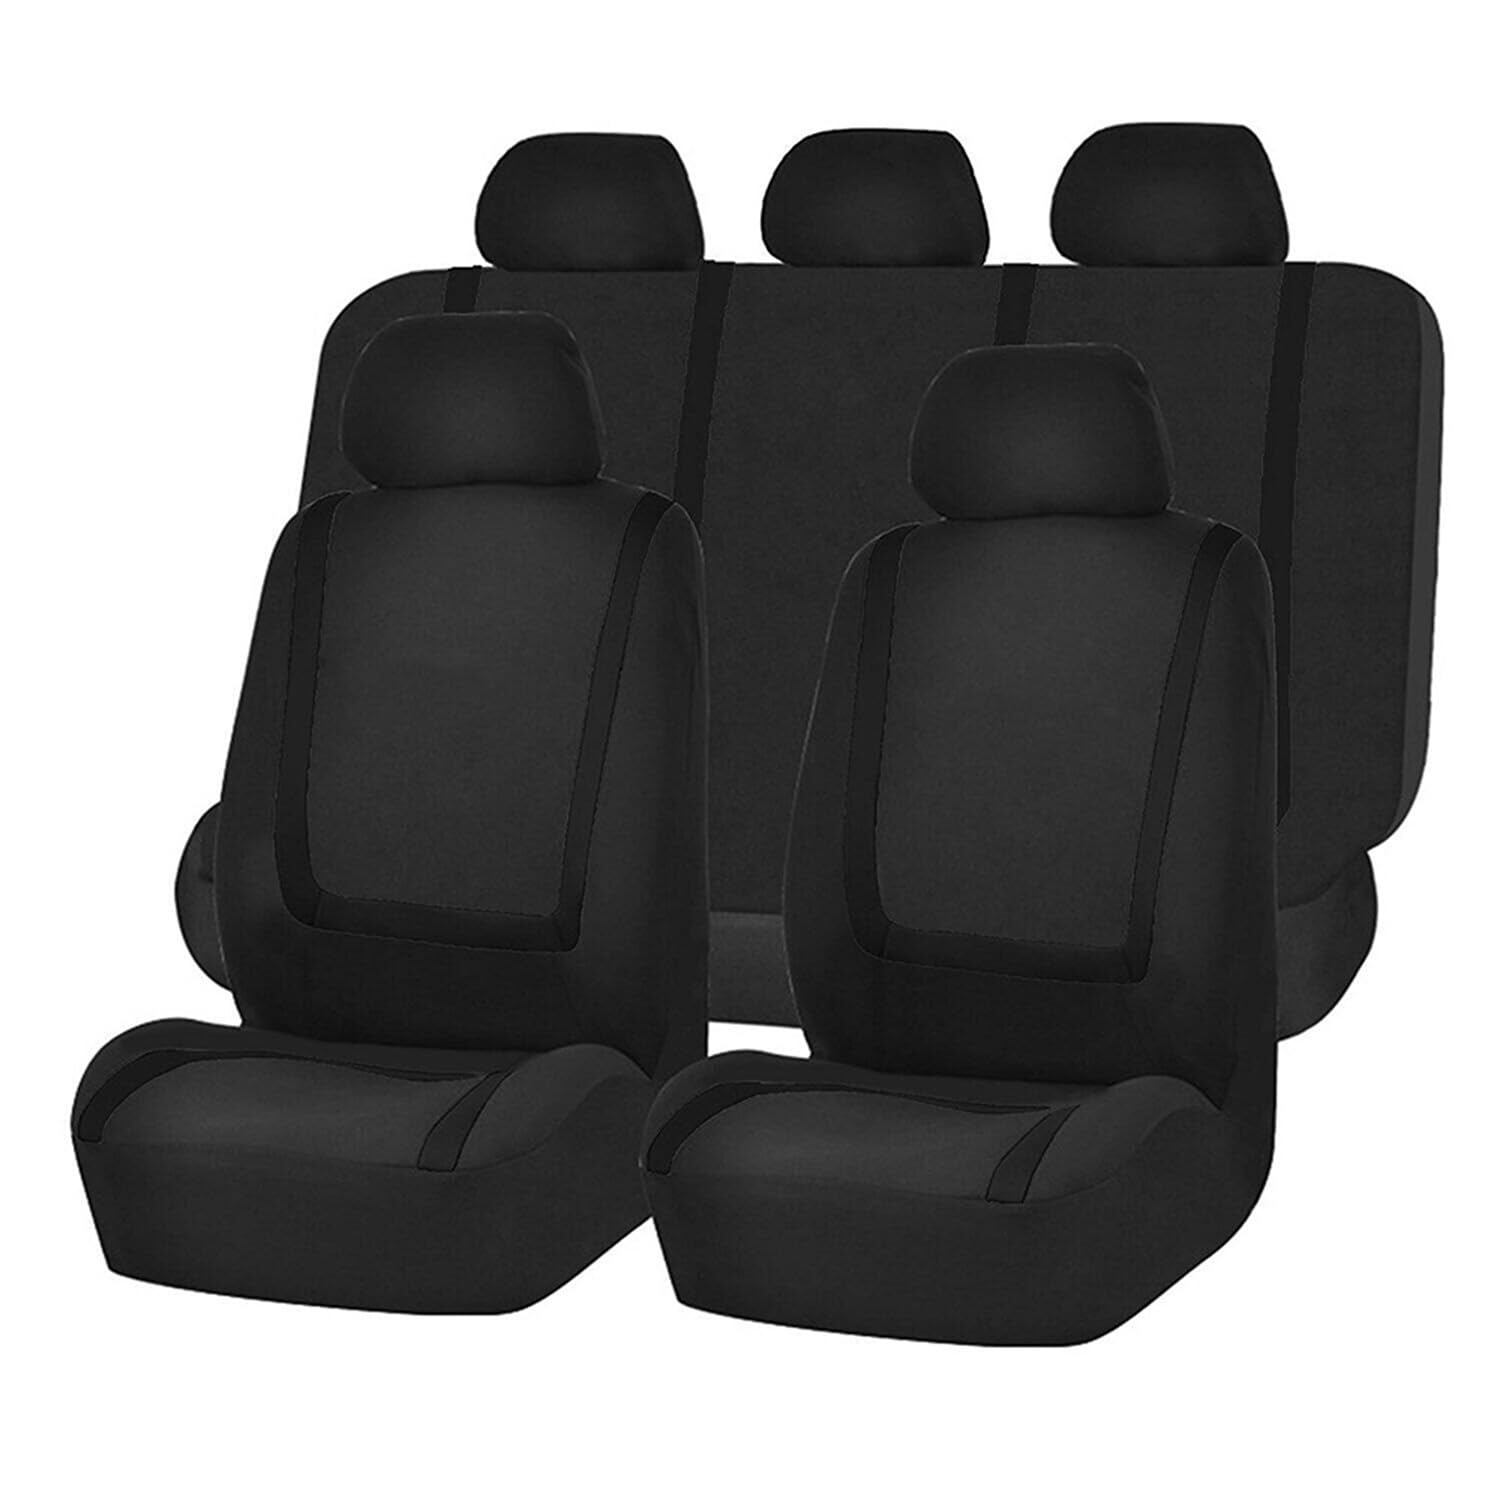 INGKE Car Seat Covers Full Set for BMW X1 X2 X3 X4 X5 X6 X7,9pcs All-Weather Breathable Waterproof Comfortable Seat Cover,A-Full Black von INGKE